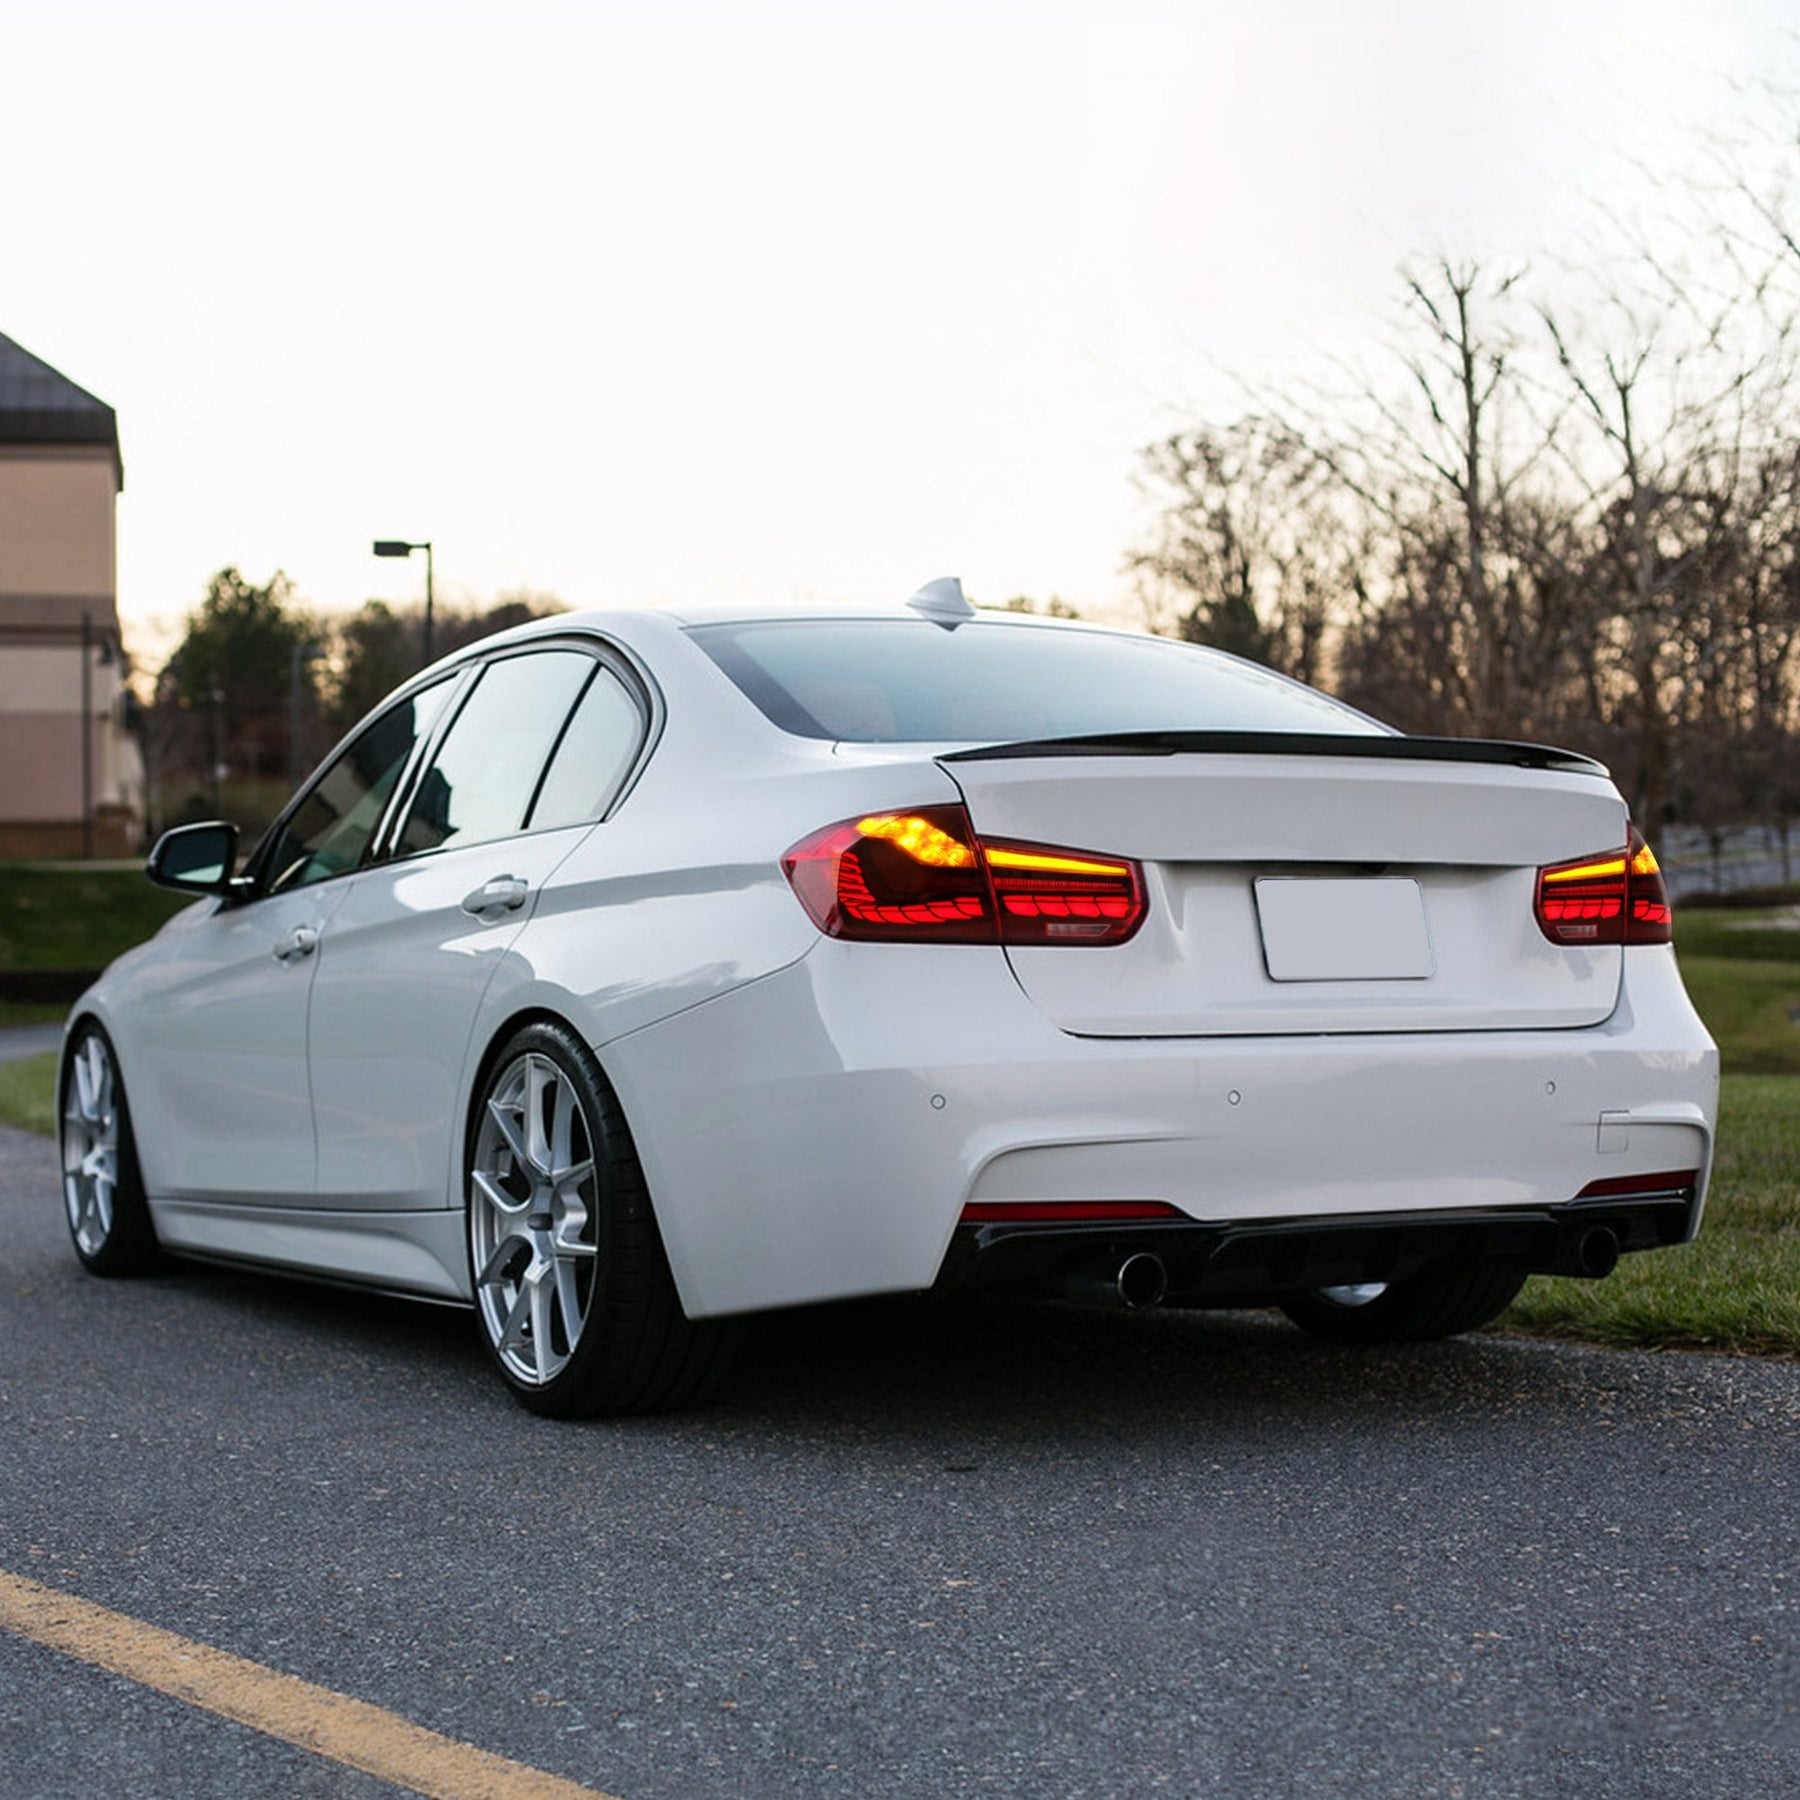 The OLED Technology Application On BMW 3/4 Series Taillights